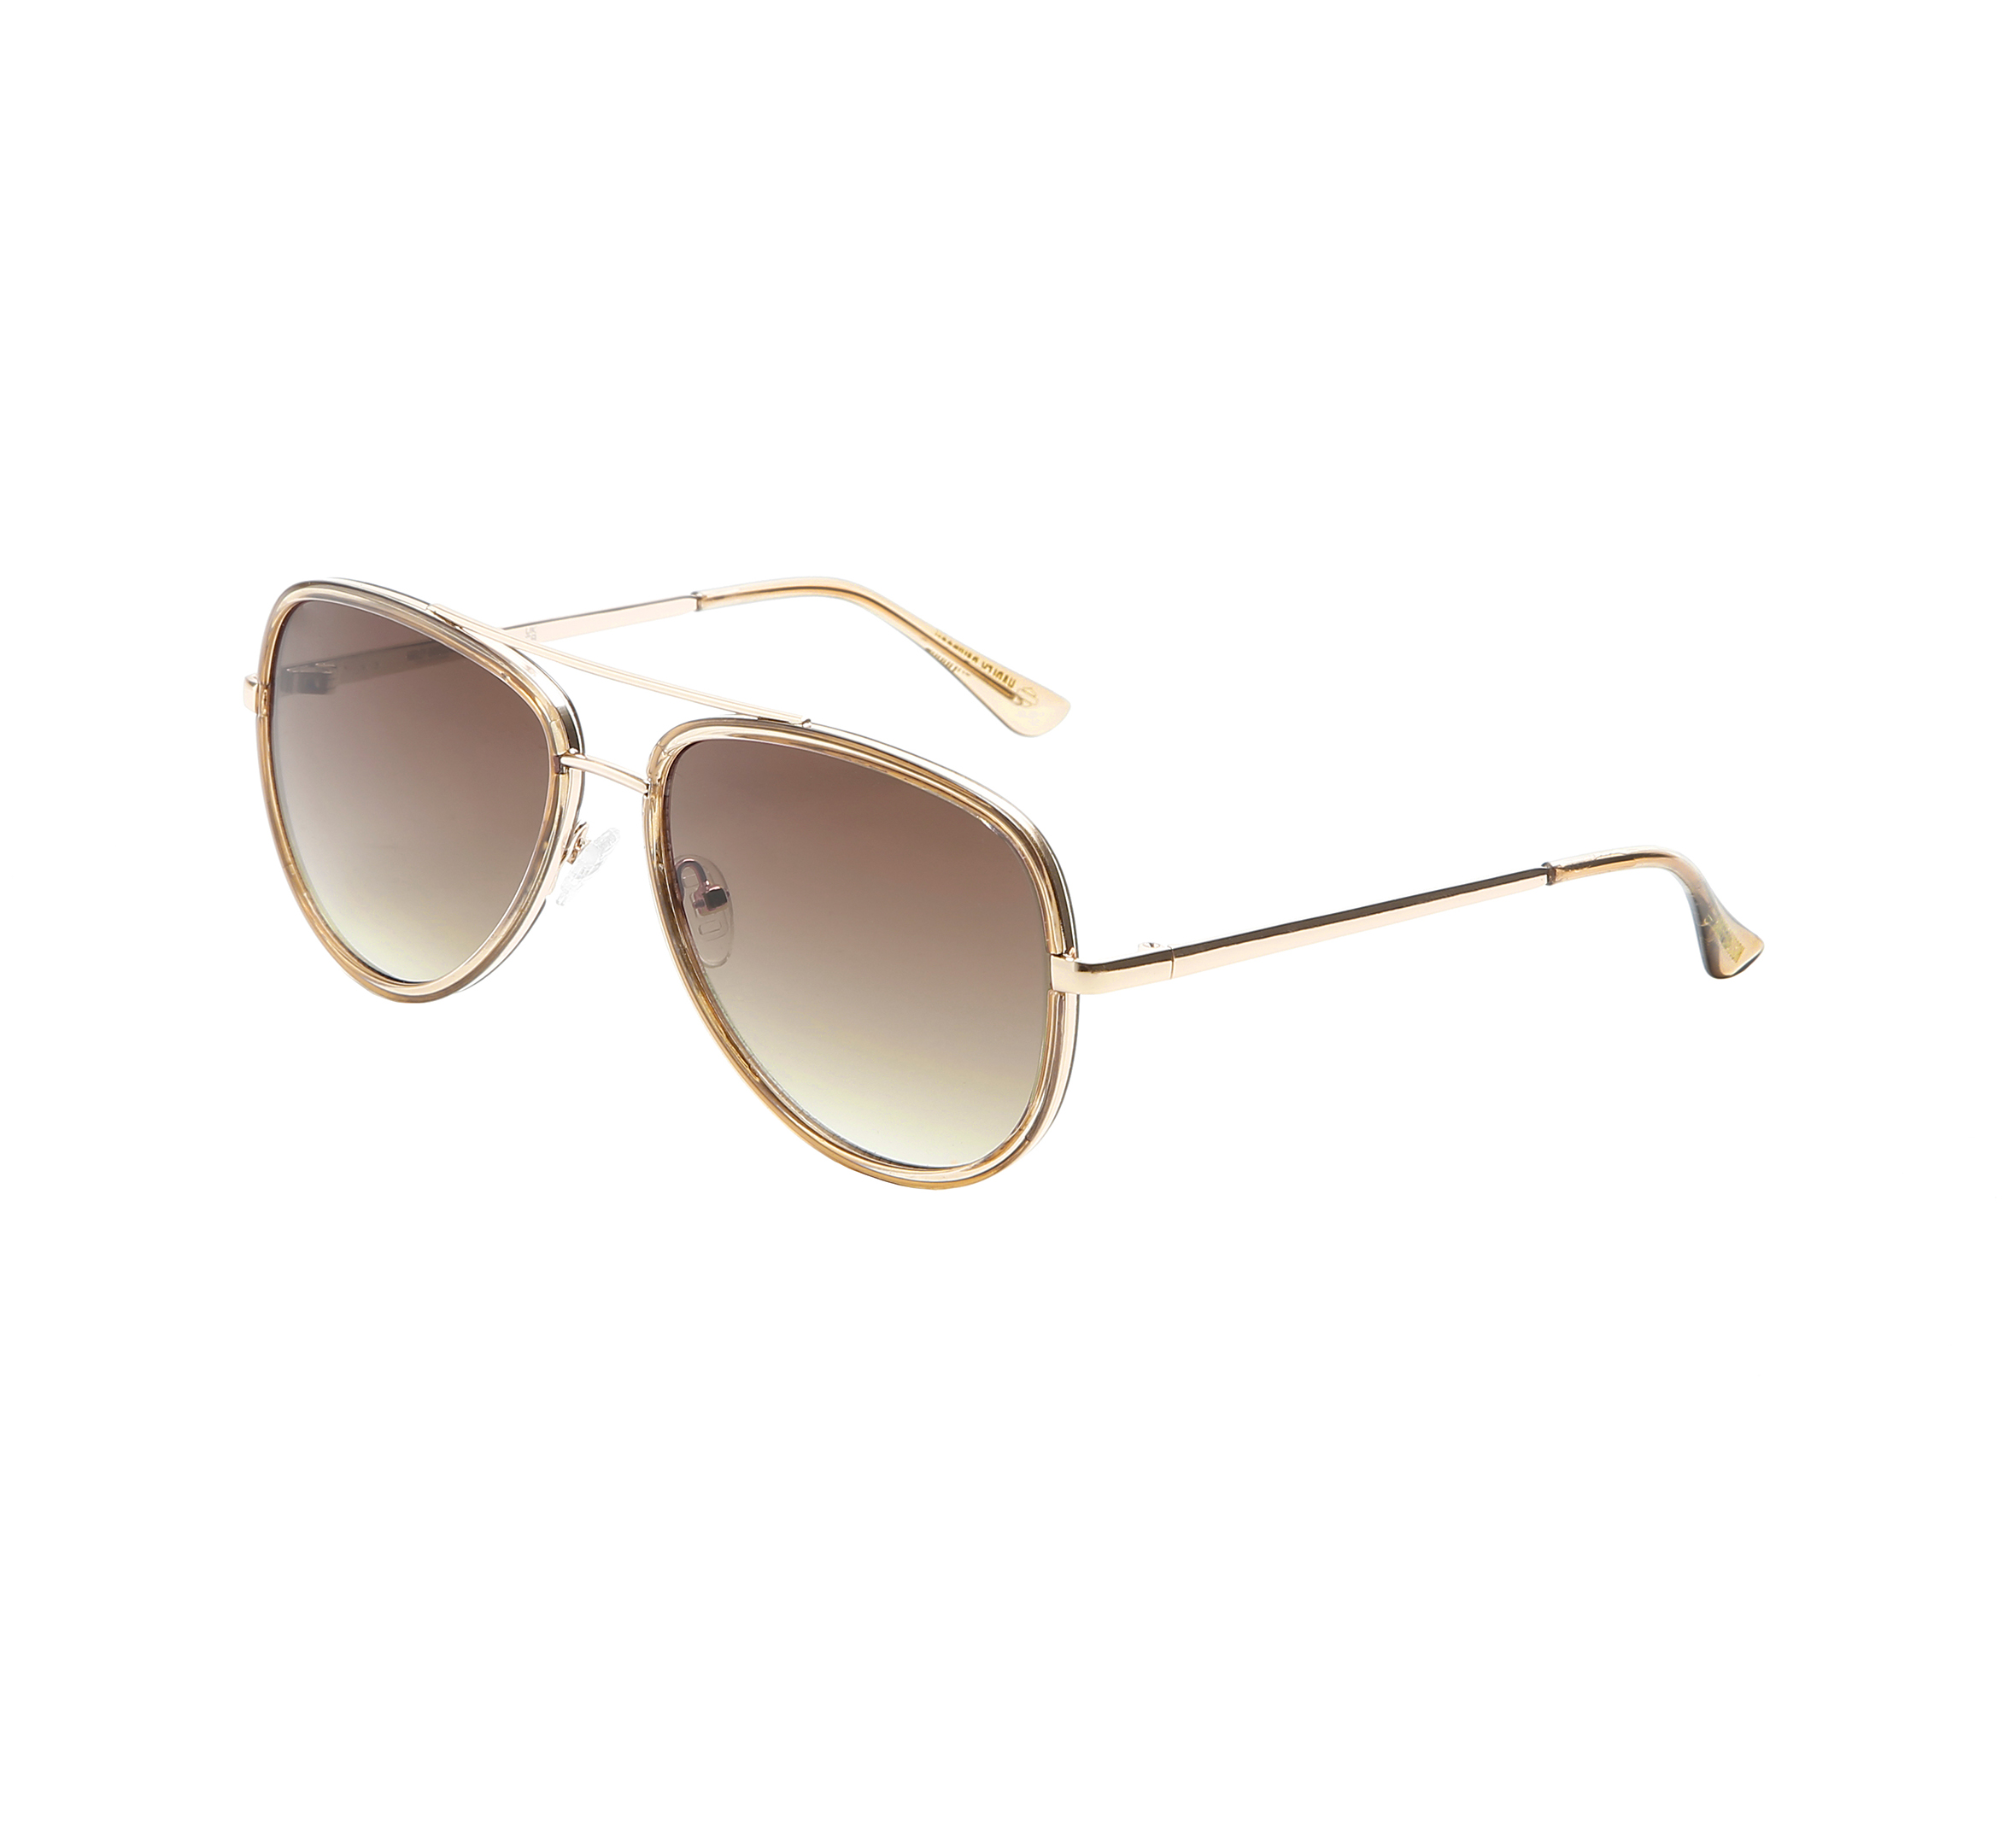 Plastic and Metal Combination Oval Sunglasses - Gold & Brown